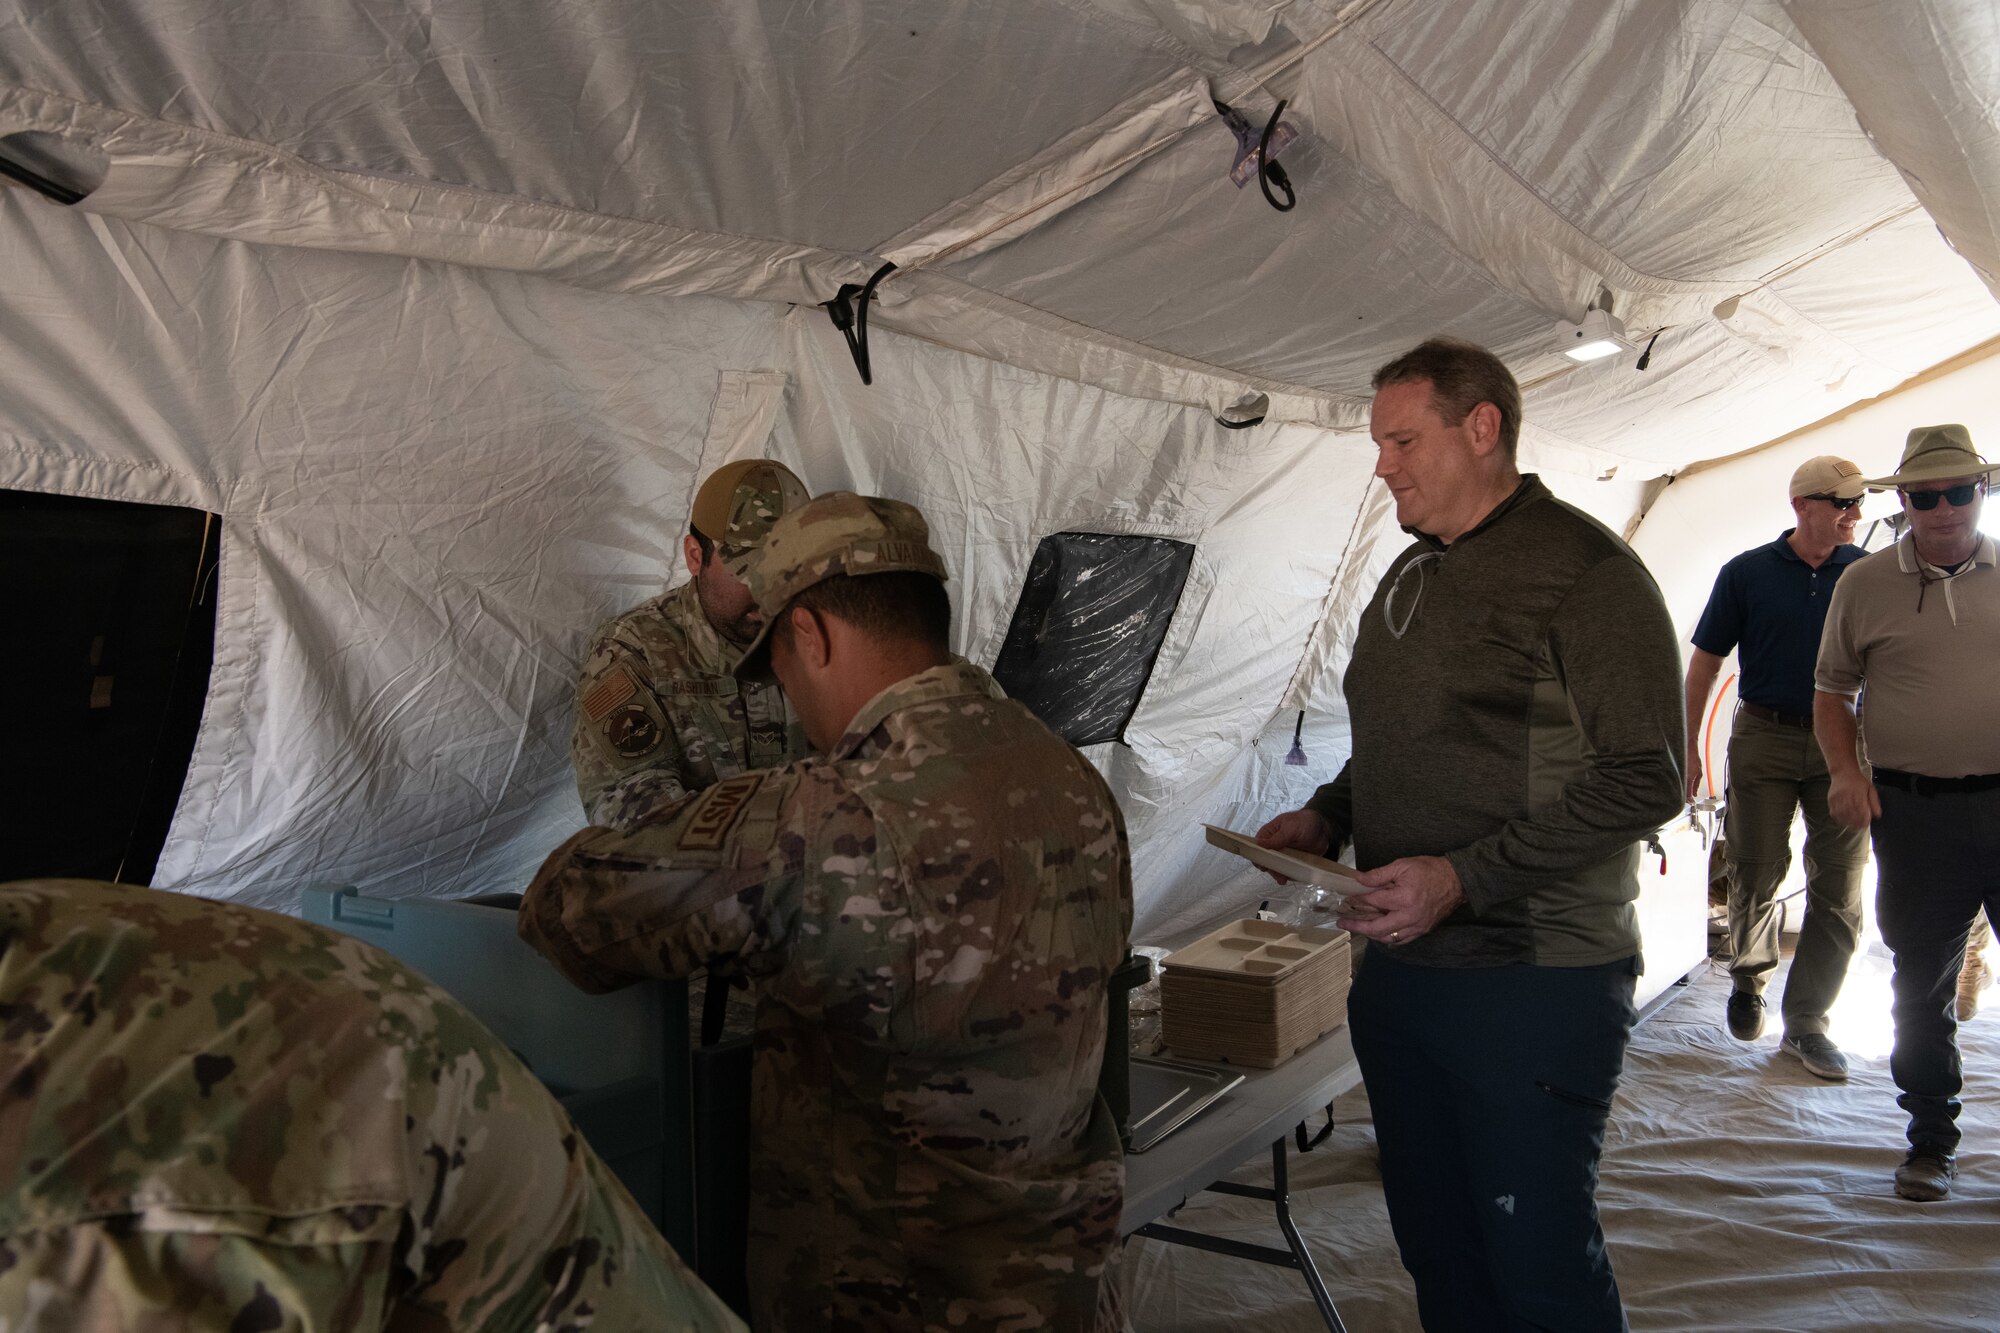 Members of the 27th Special Operations Wing’s Mission Sustainment Team prepare lunch in a field kitchen for Secretary Andrew Hunter, Assistant Secretary of the Air Force for Acquisition, Technology and Logistics, at Melrose Air Force Range, Melrose, N.M.